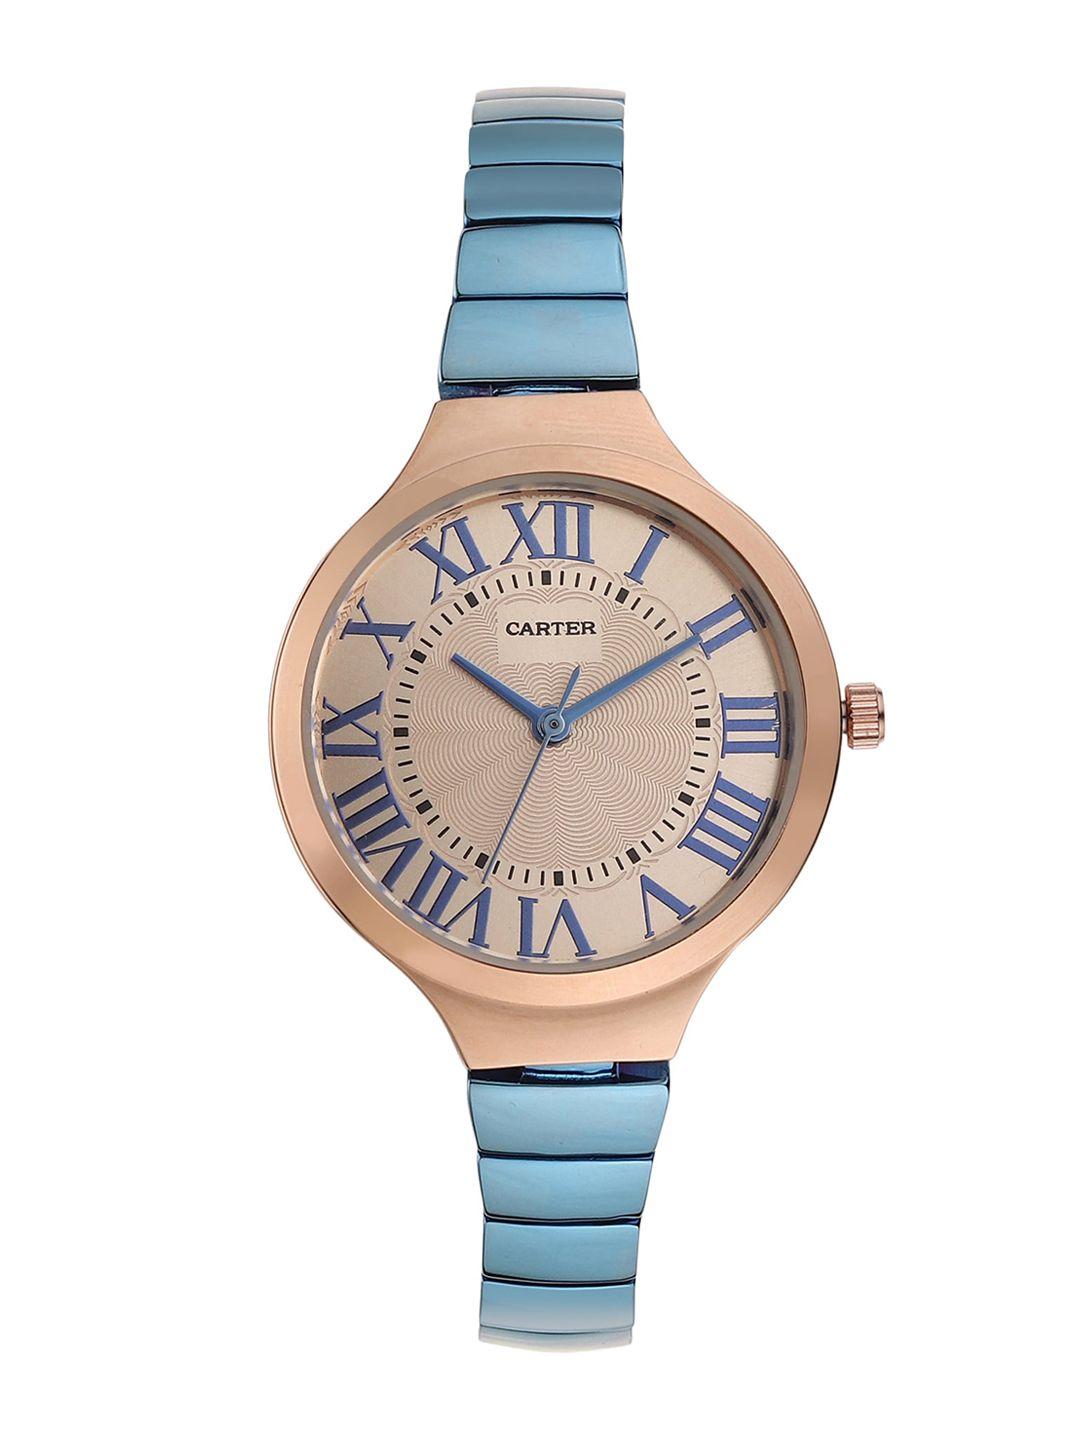 sandy d carter women cream-coloured dial & blue stainless steel bracelet style straps analogue watch